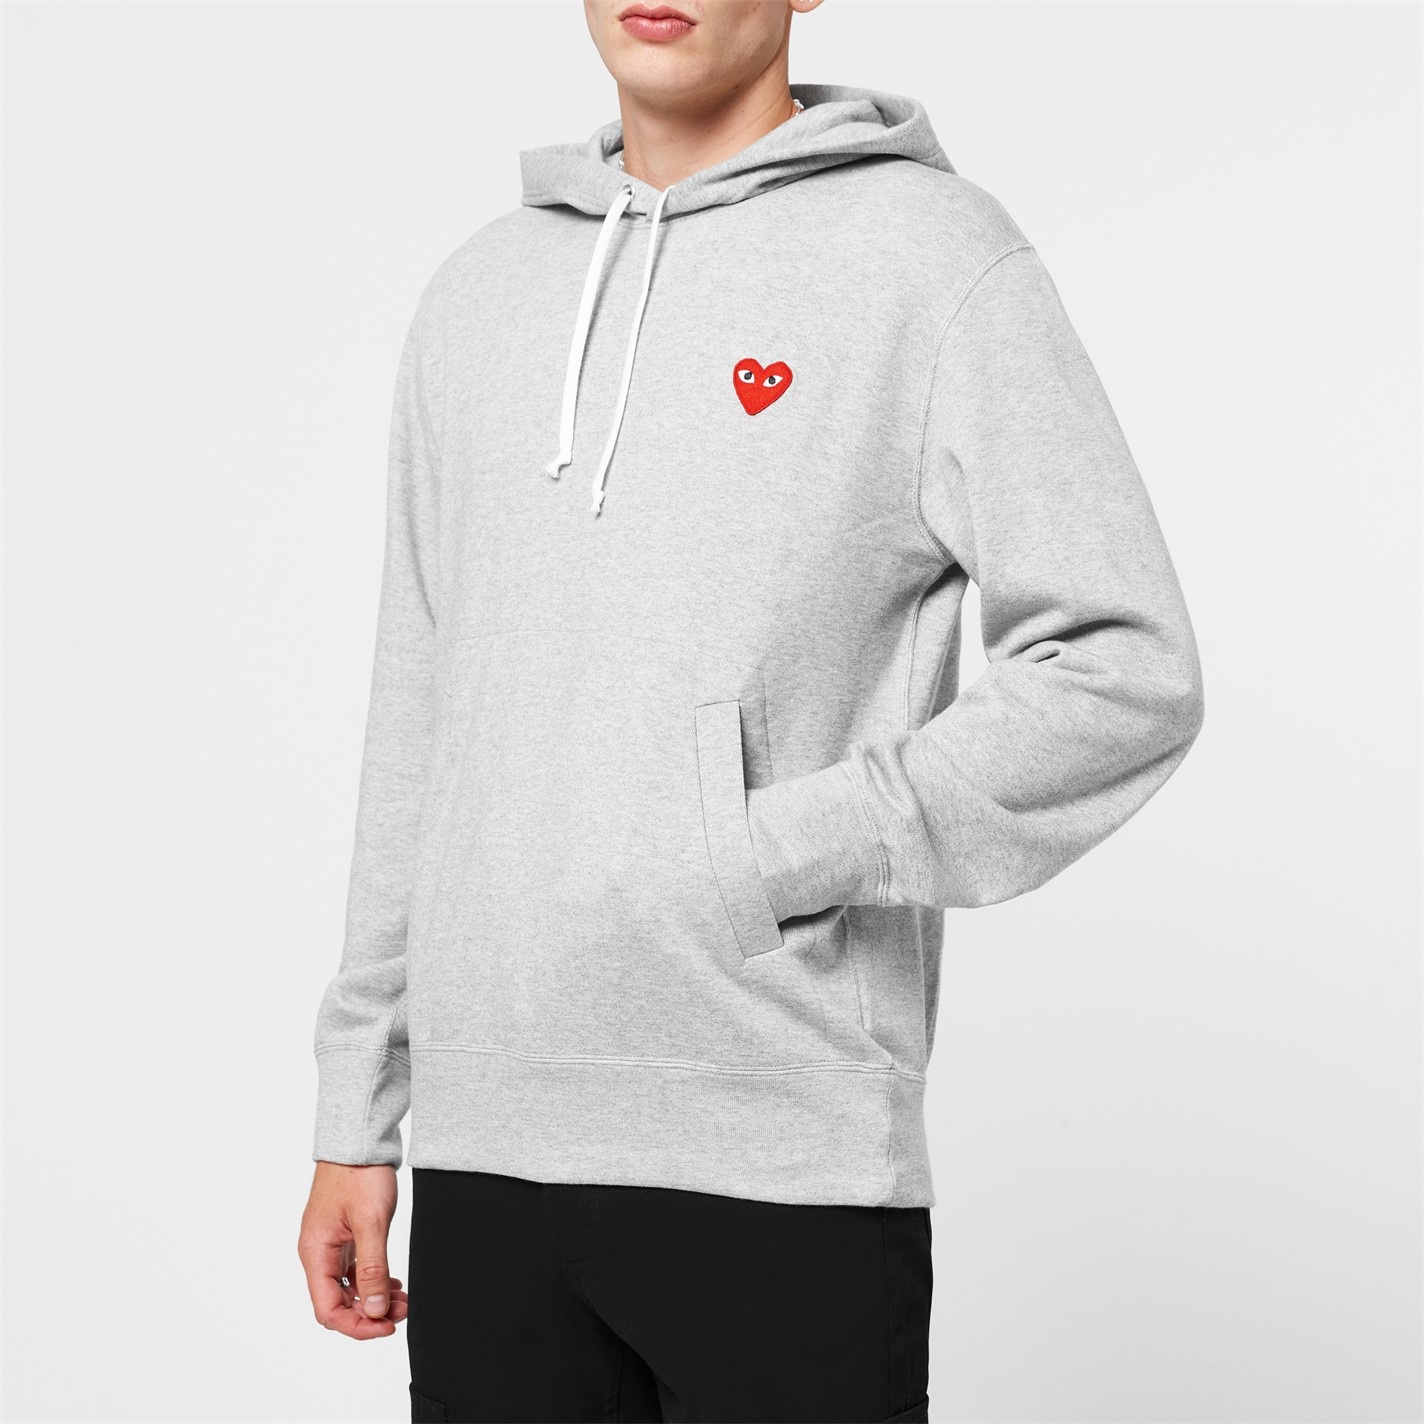 Small Heart Oth Hoodie - 4